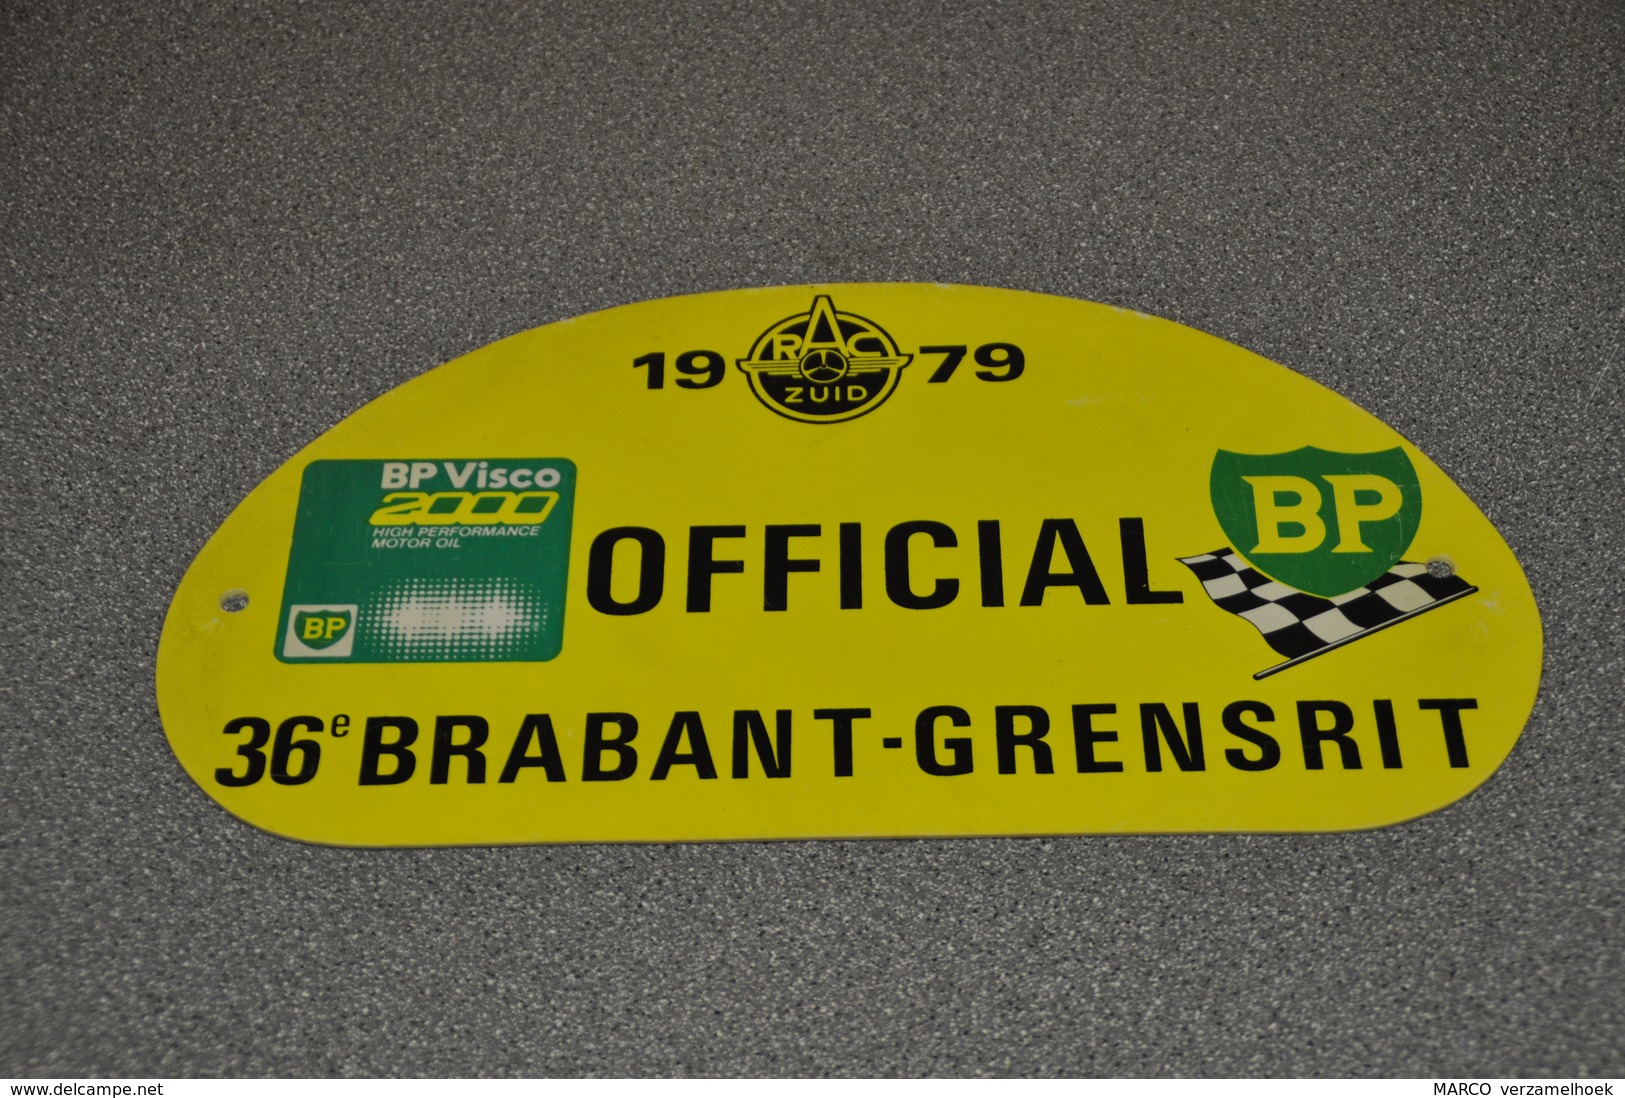 Rally Plaat-rallye Plaque Plastic: 36e Brabant-grensrit OFFICIAL 1979 RAC-zuid BP - Rally-affiches